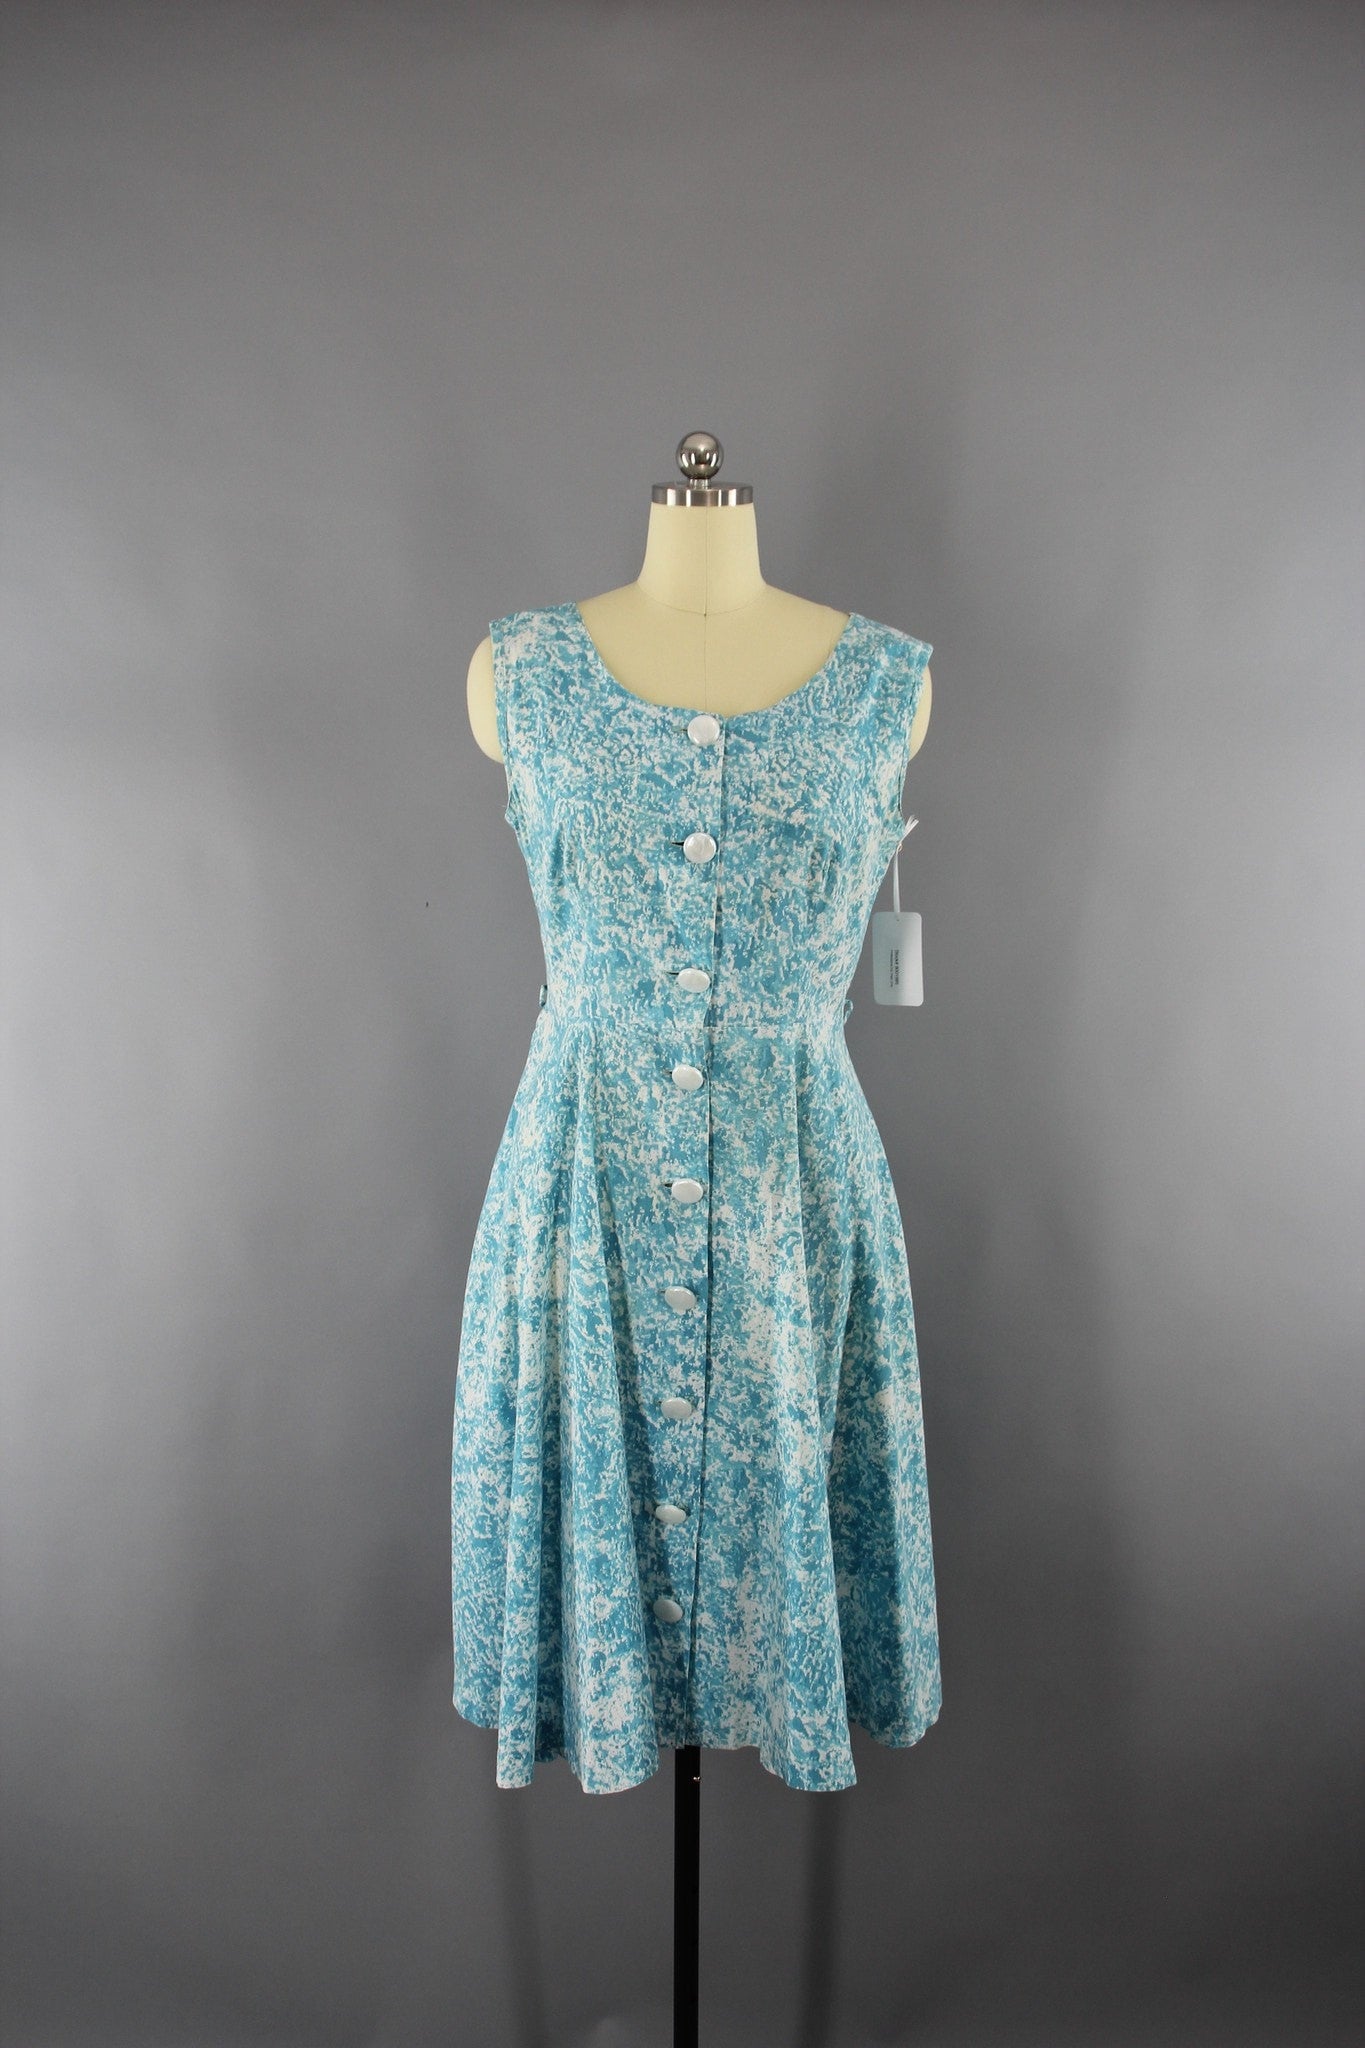 1950s Vintage Day Dress with Blue Abstract Print - ThisBlueBird